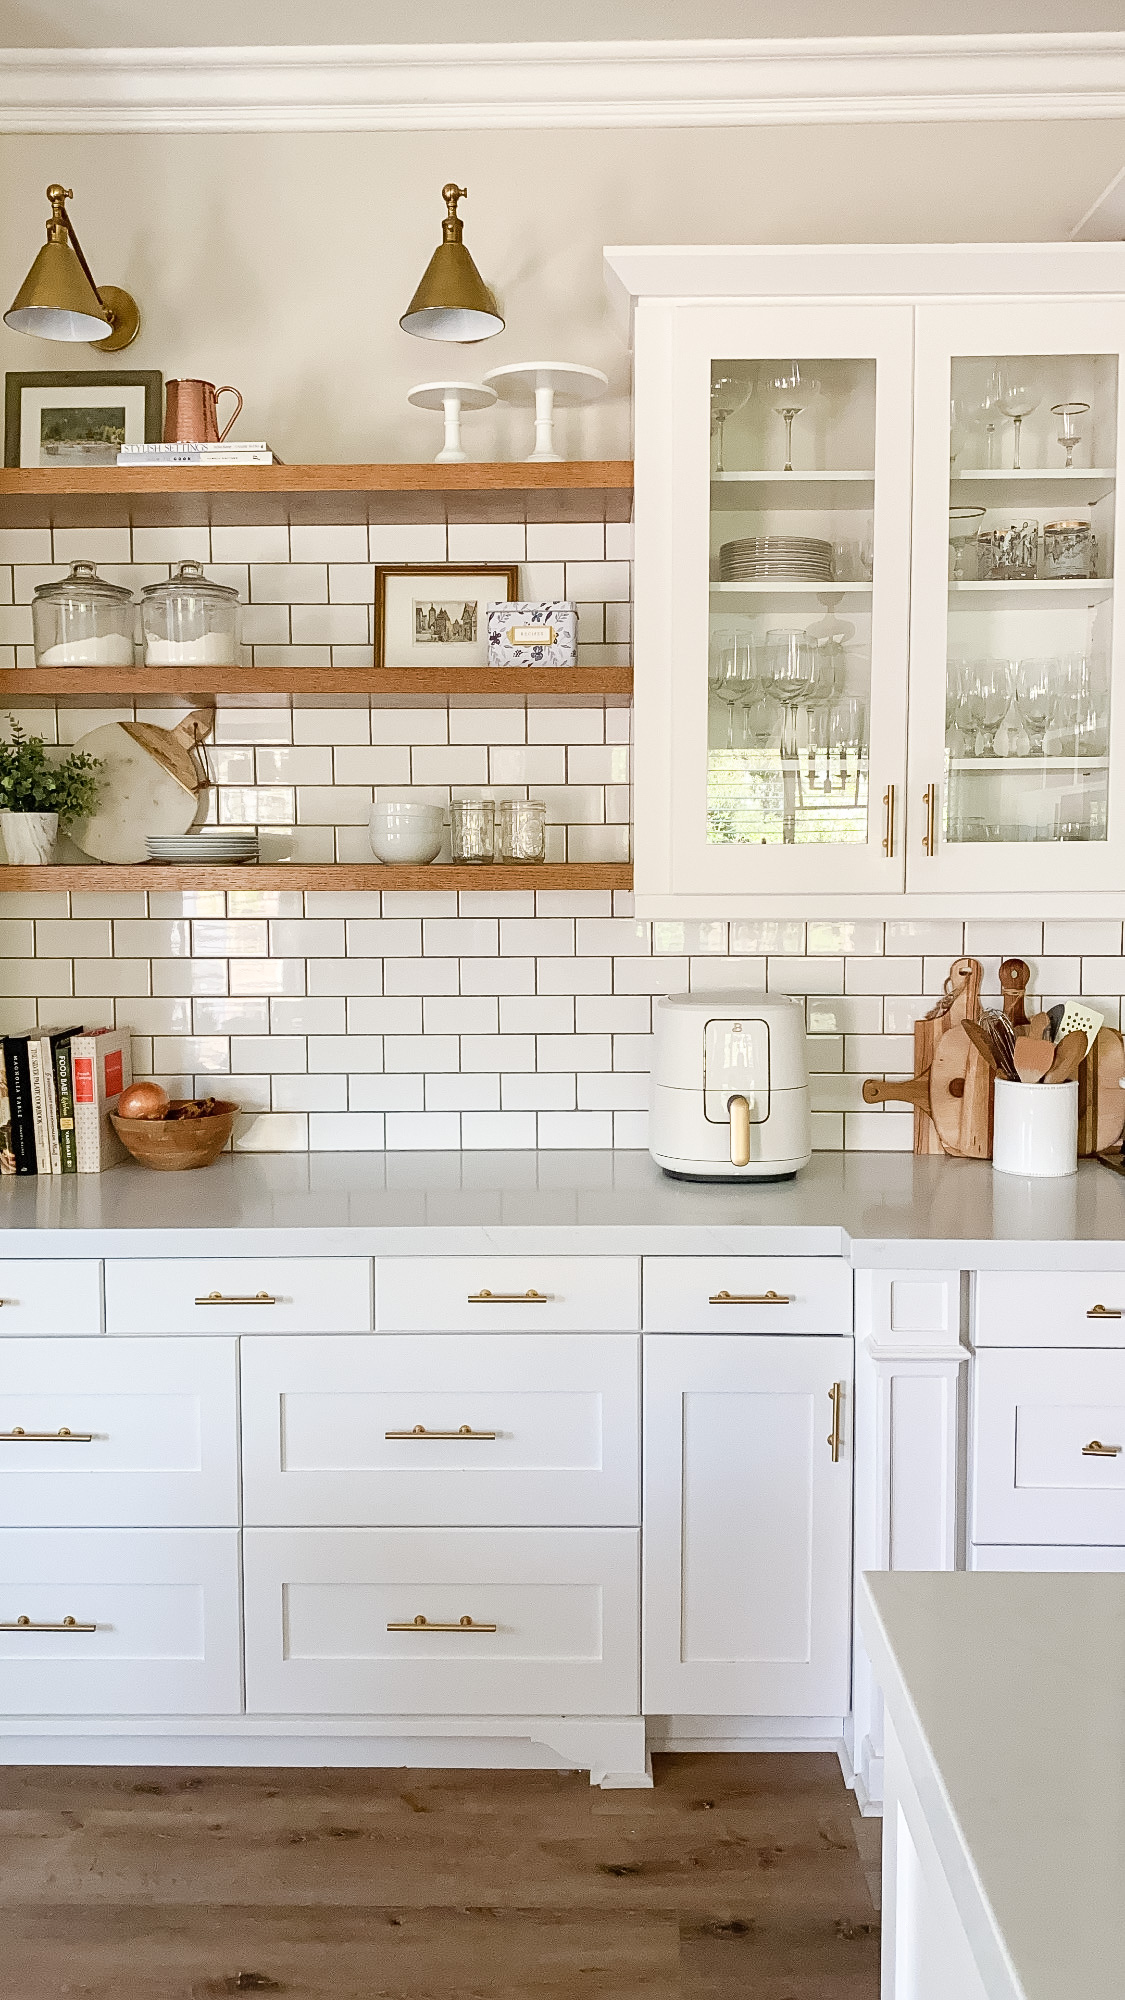 Drew Barrymore's Beautiful Kitchen Line Launches New Mixer Collection